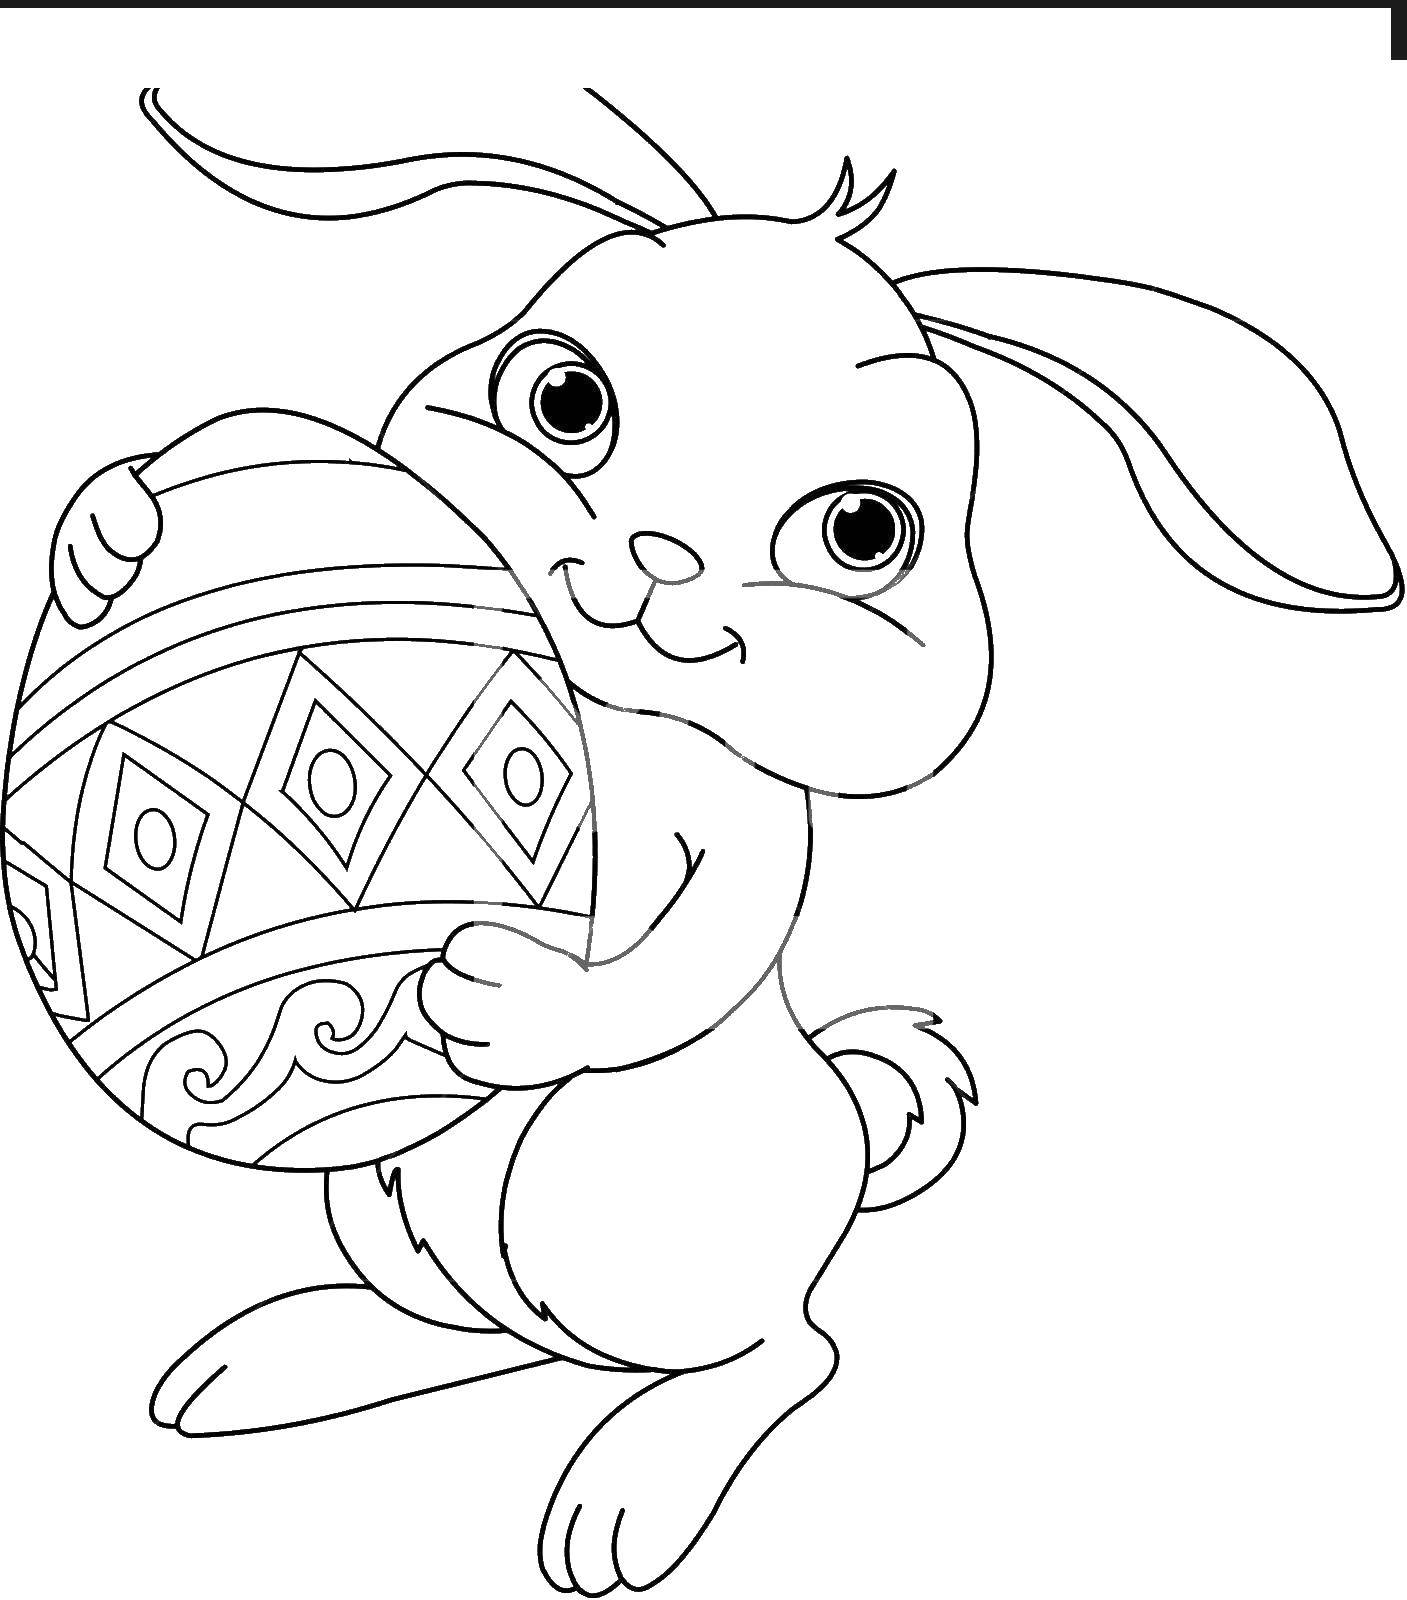 Coloring Rabbit hugging Easter egg. Category the rabbit. Tags:  rabbit, hare.